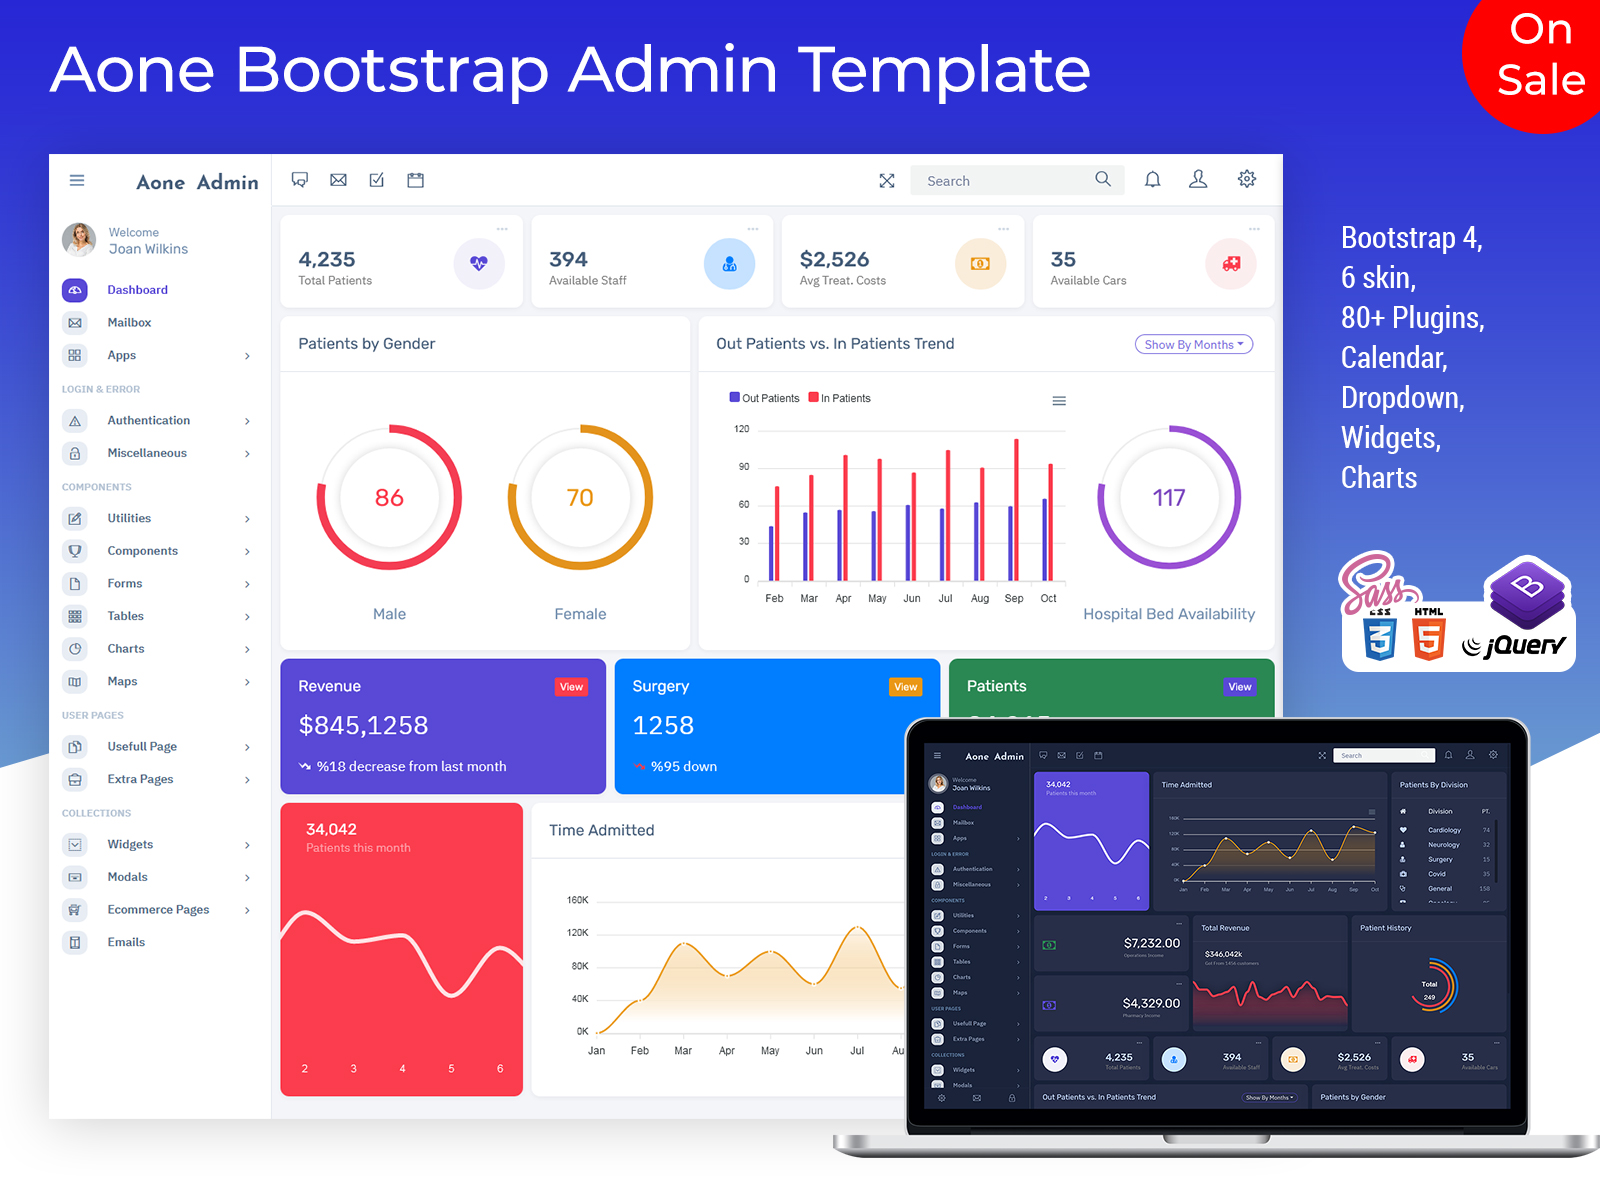 Bootstrap 4 Admin Templates Fully Responsive Dashboard UI Kit – Aone